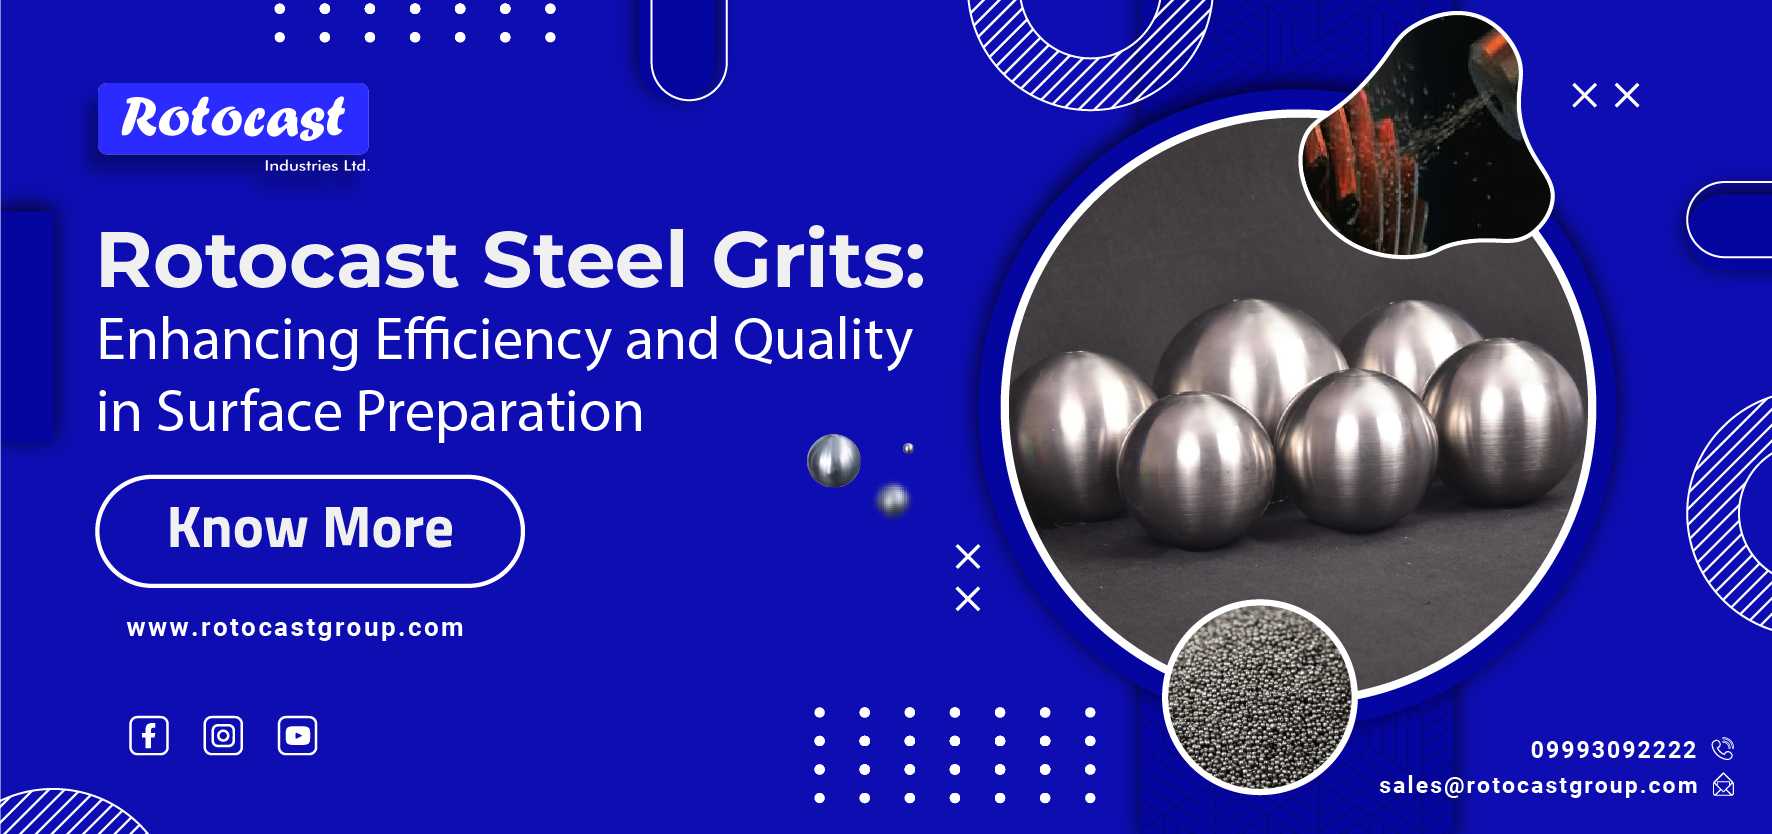 Advantages of Rotocast_Steel_Grits